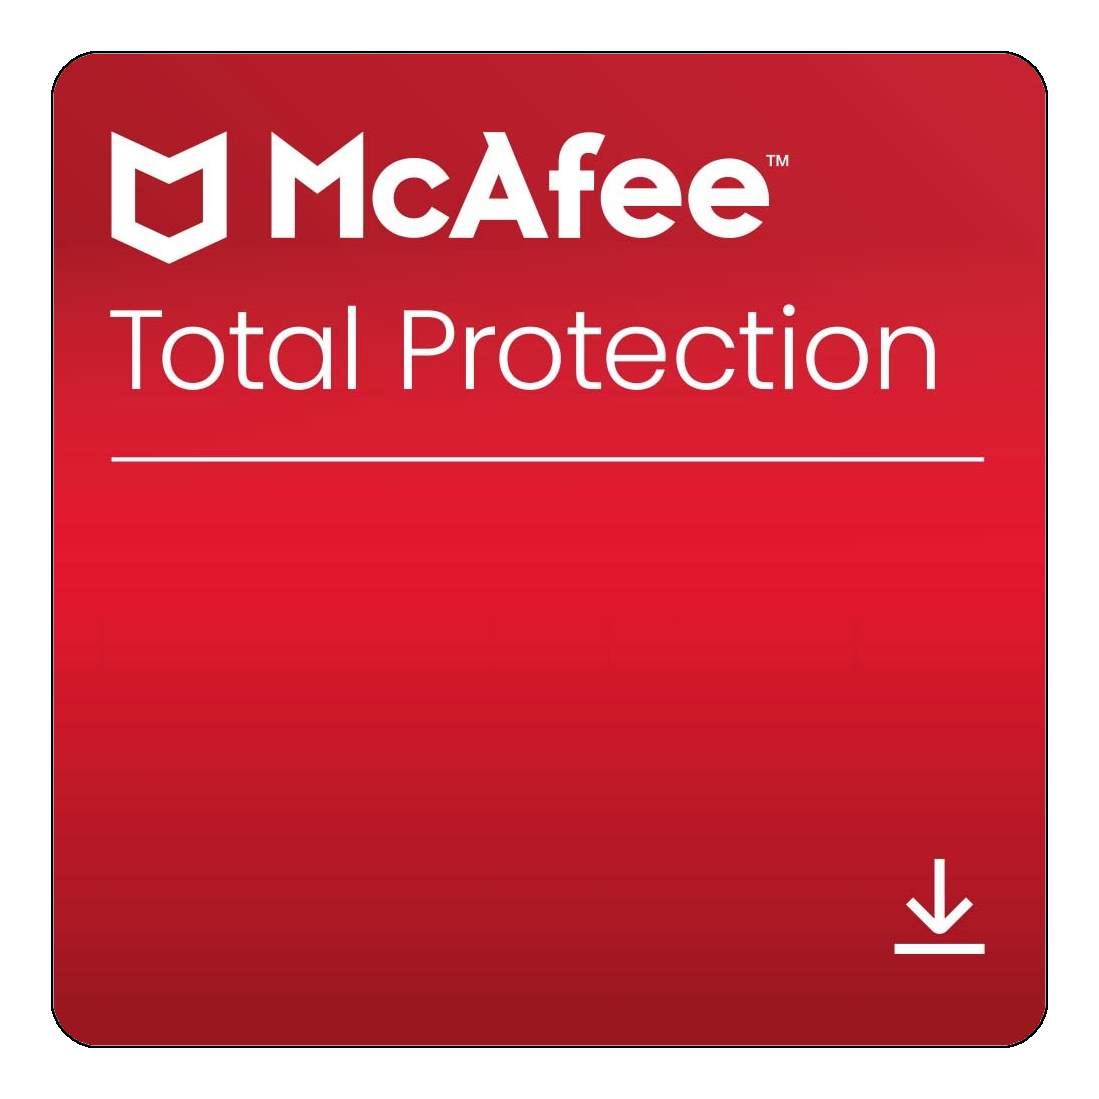 mcafee-total-protection_4